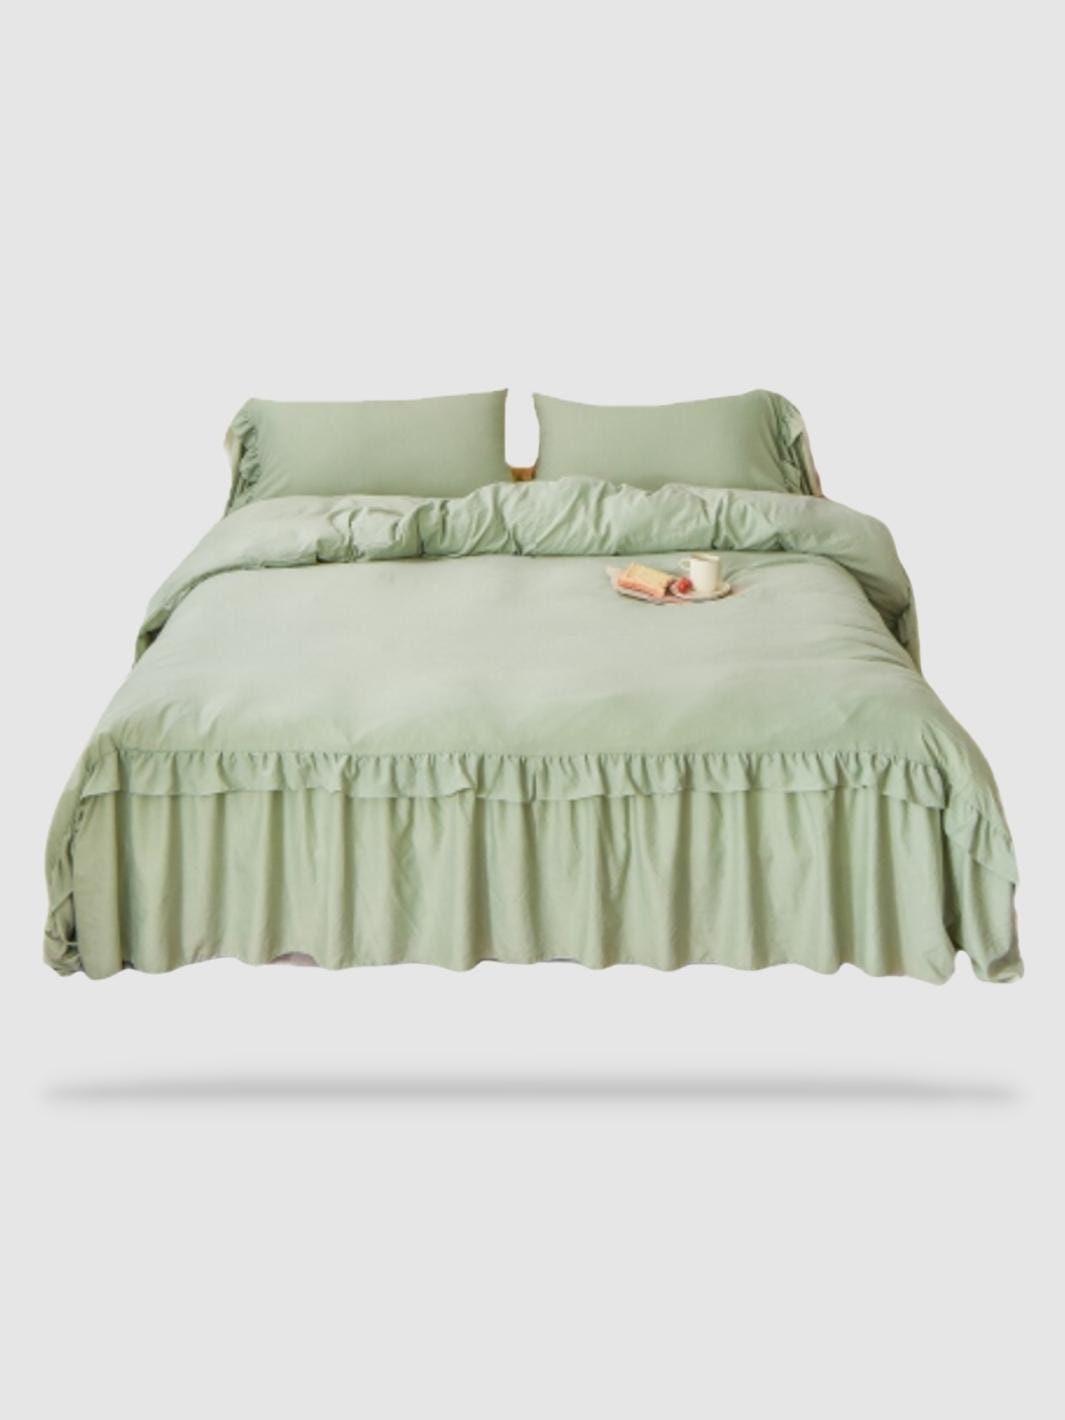 Duvet Cover 220x240 Cm Dark Green Solid Color - Double Bed Set With Zipper  - Microfiber Duvet Cover With 2 Pillowcases 65x65 Cm